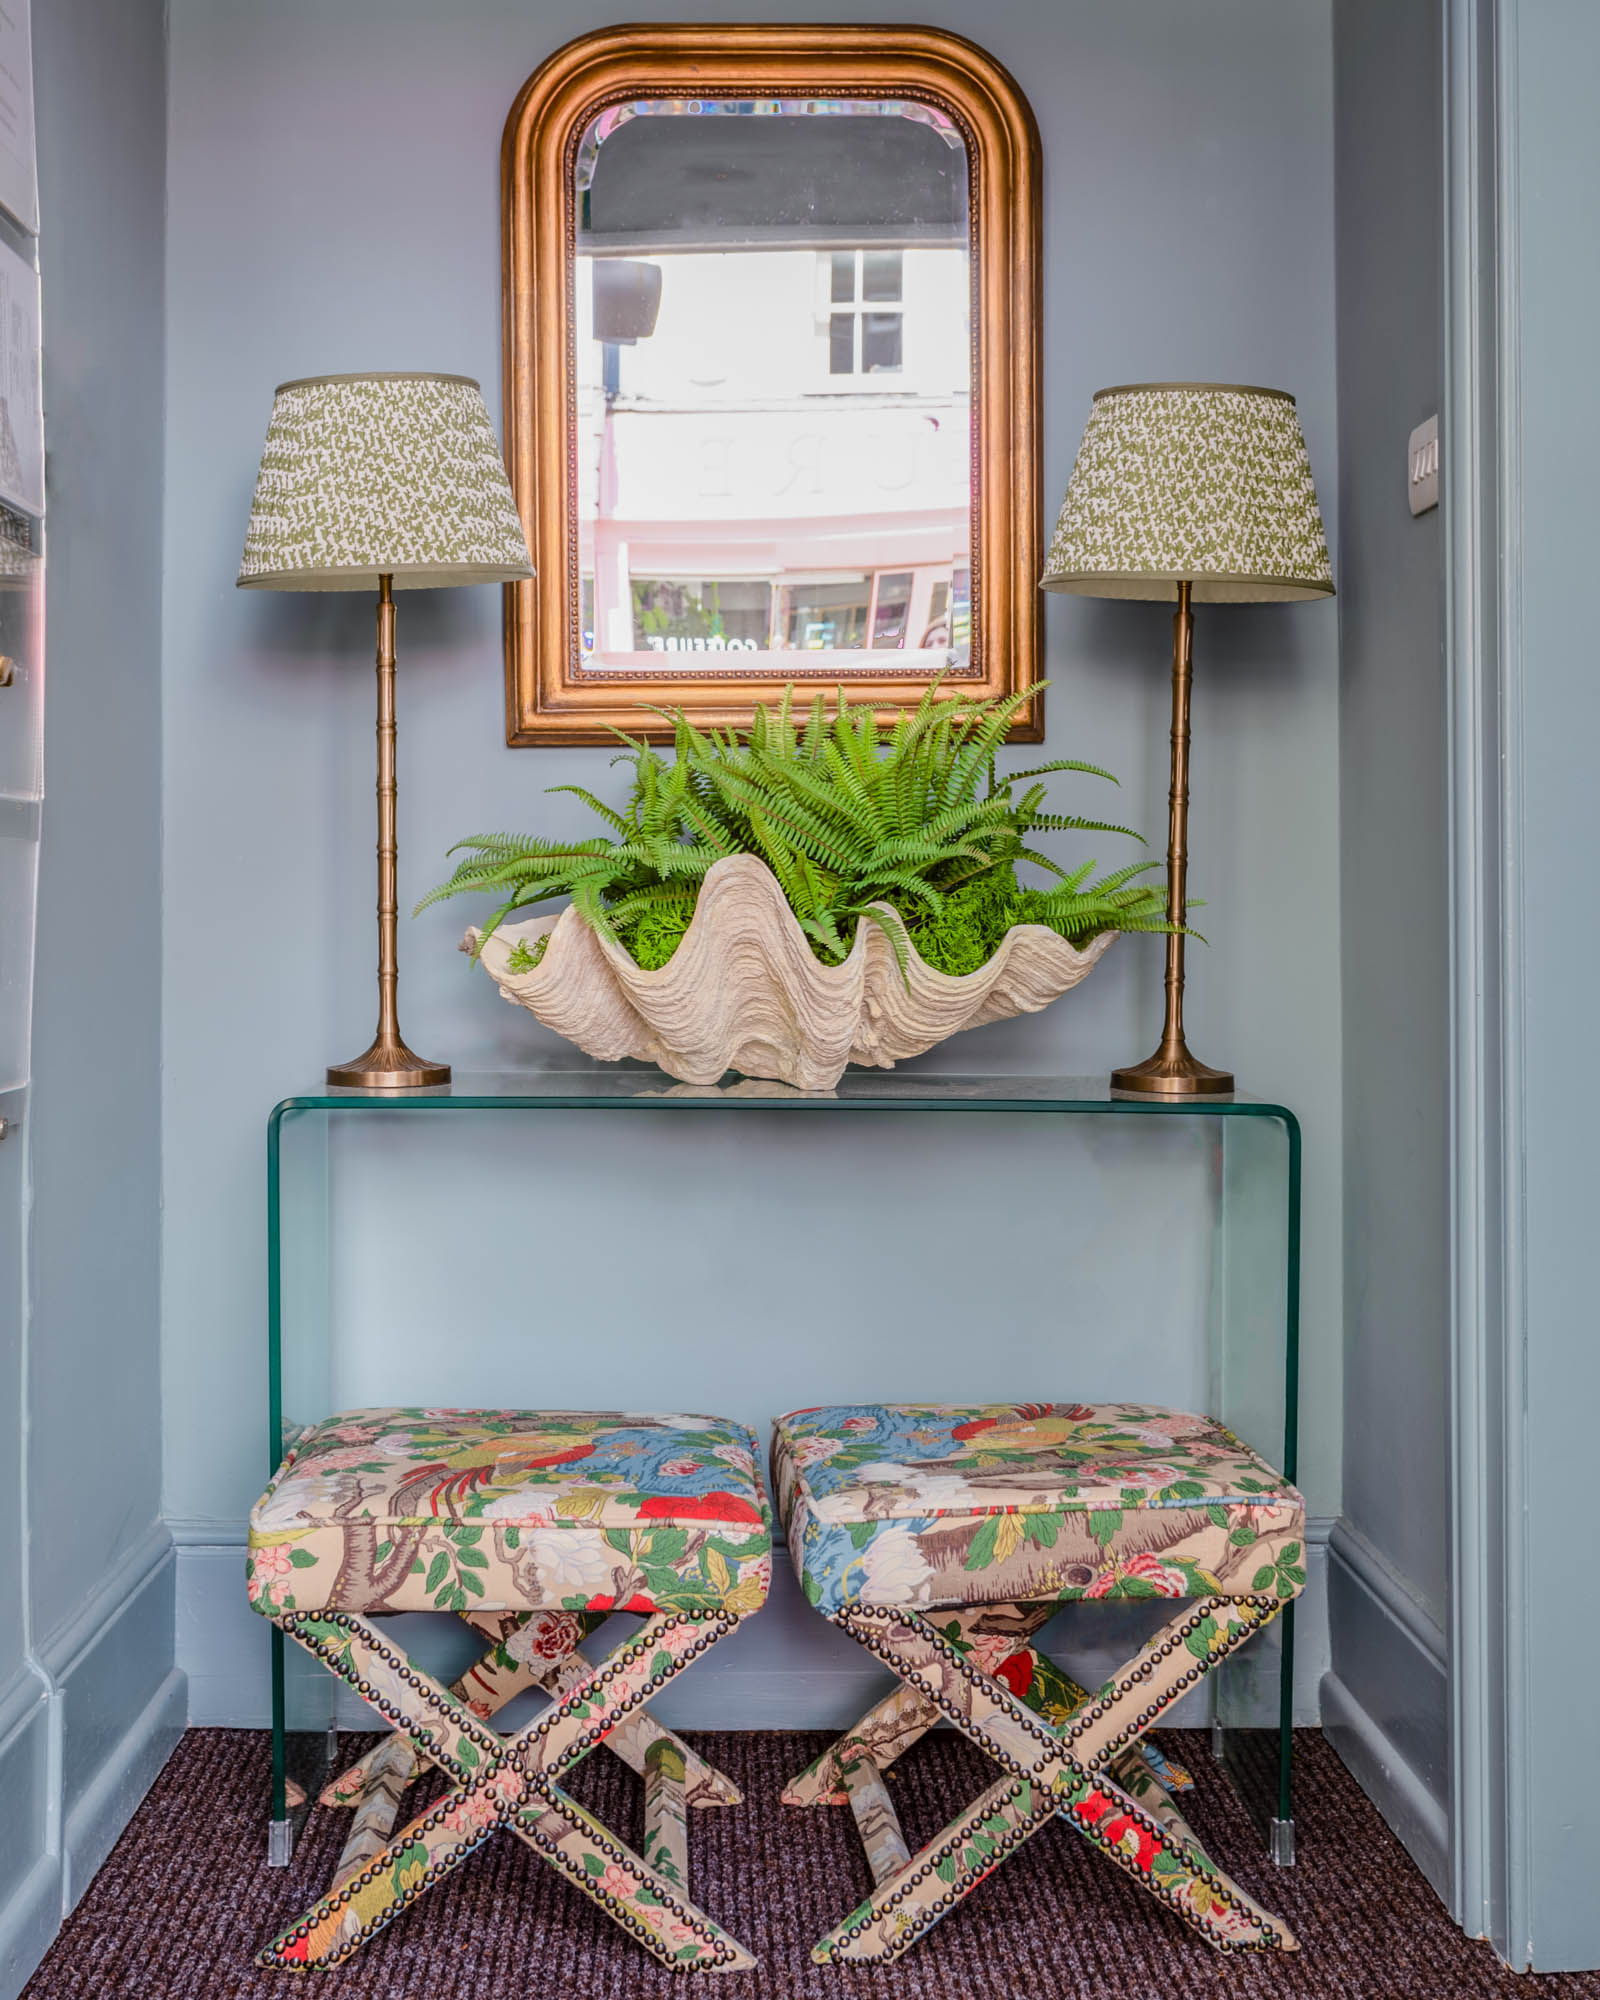 The entryway of a boutique real estate agency, features Farrow & Ball’s Oval Room Blue on the walls, and a glass console table, on which is placed two Pooky lamps with green shades and a large clamshell overflowing with fern fronds. Below this sit two bespoke x-frame stools upholstered in GP & J Baker’s Rockbird Signature botanical print.